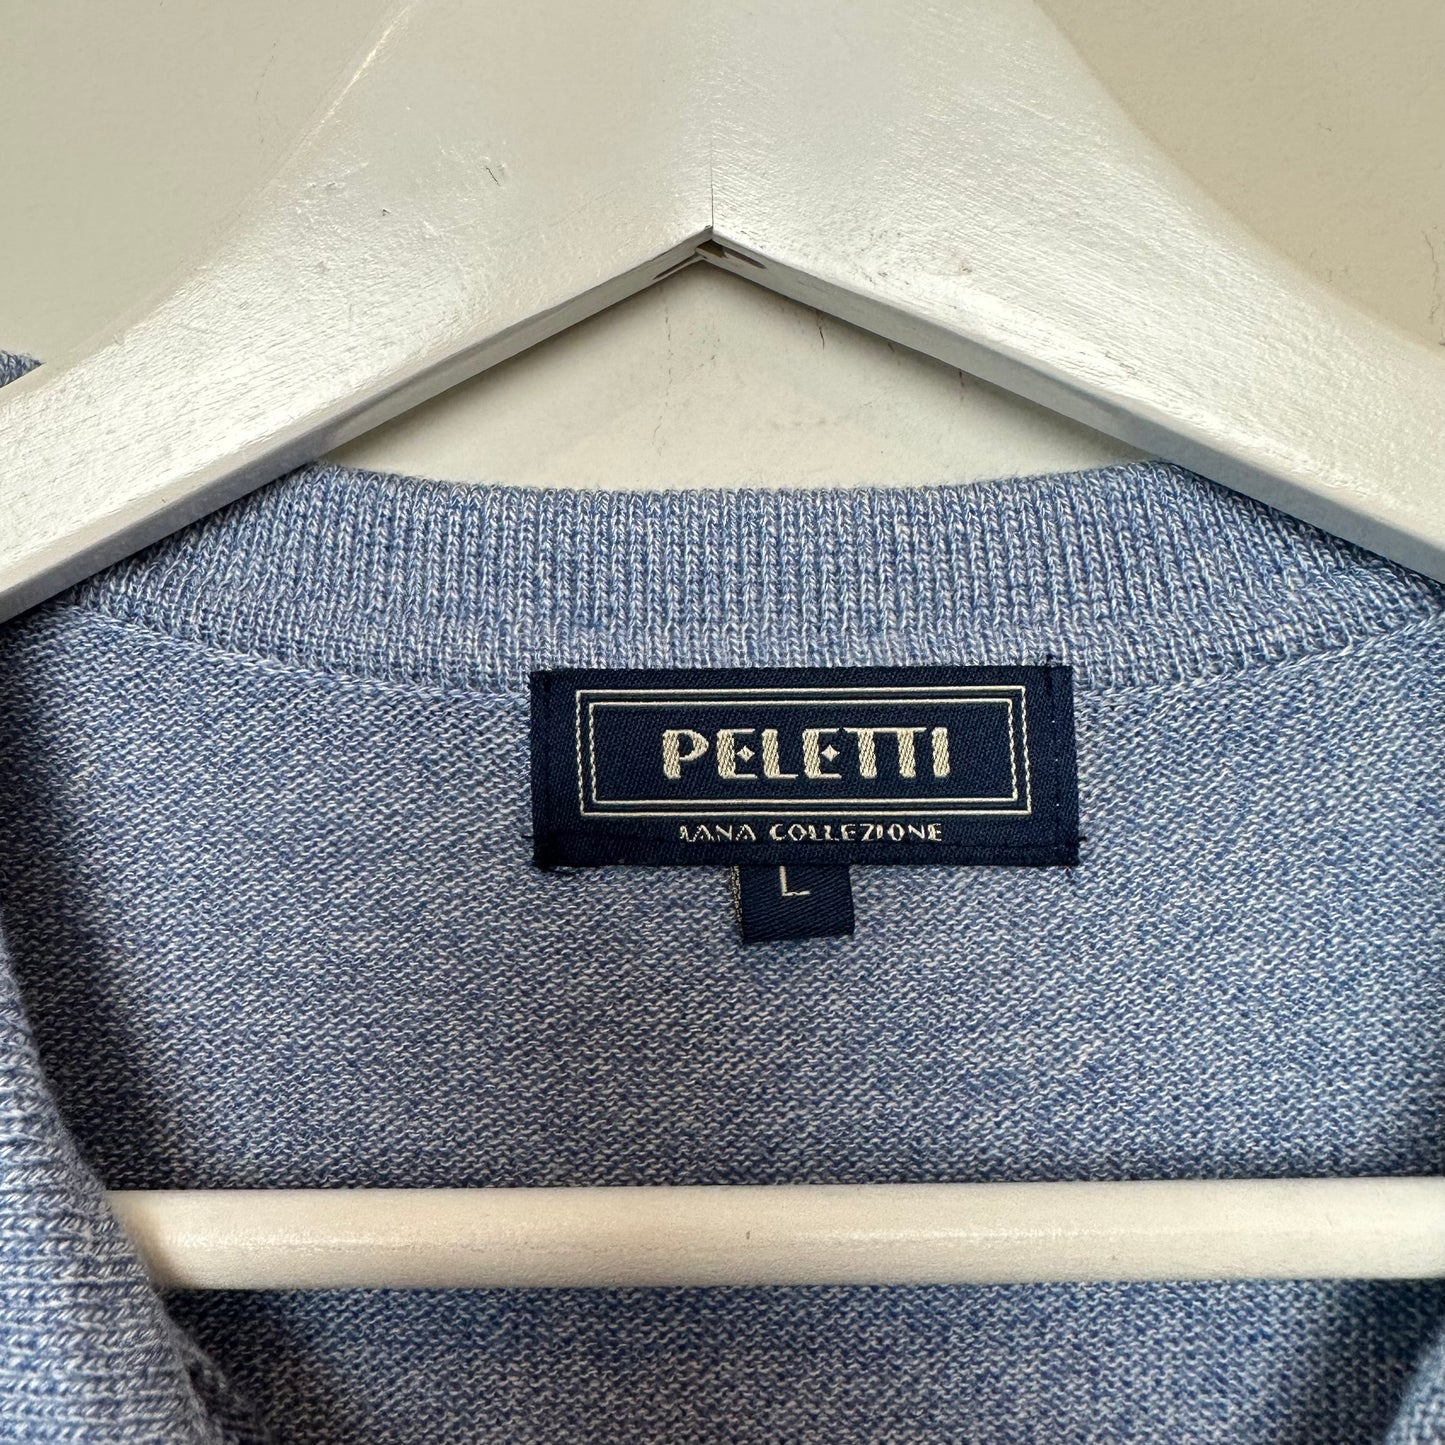 Retro Style Sweater Polo Peletti Blue Patterned Collared Polo Knit Large